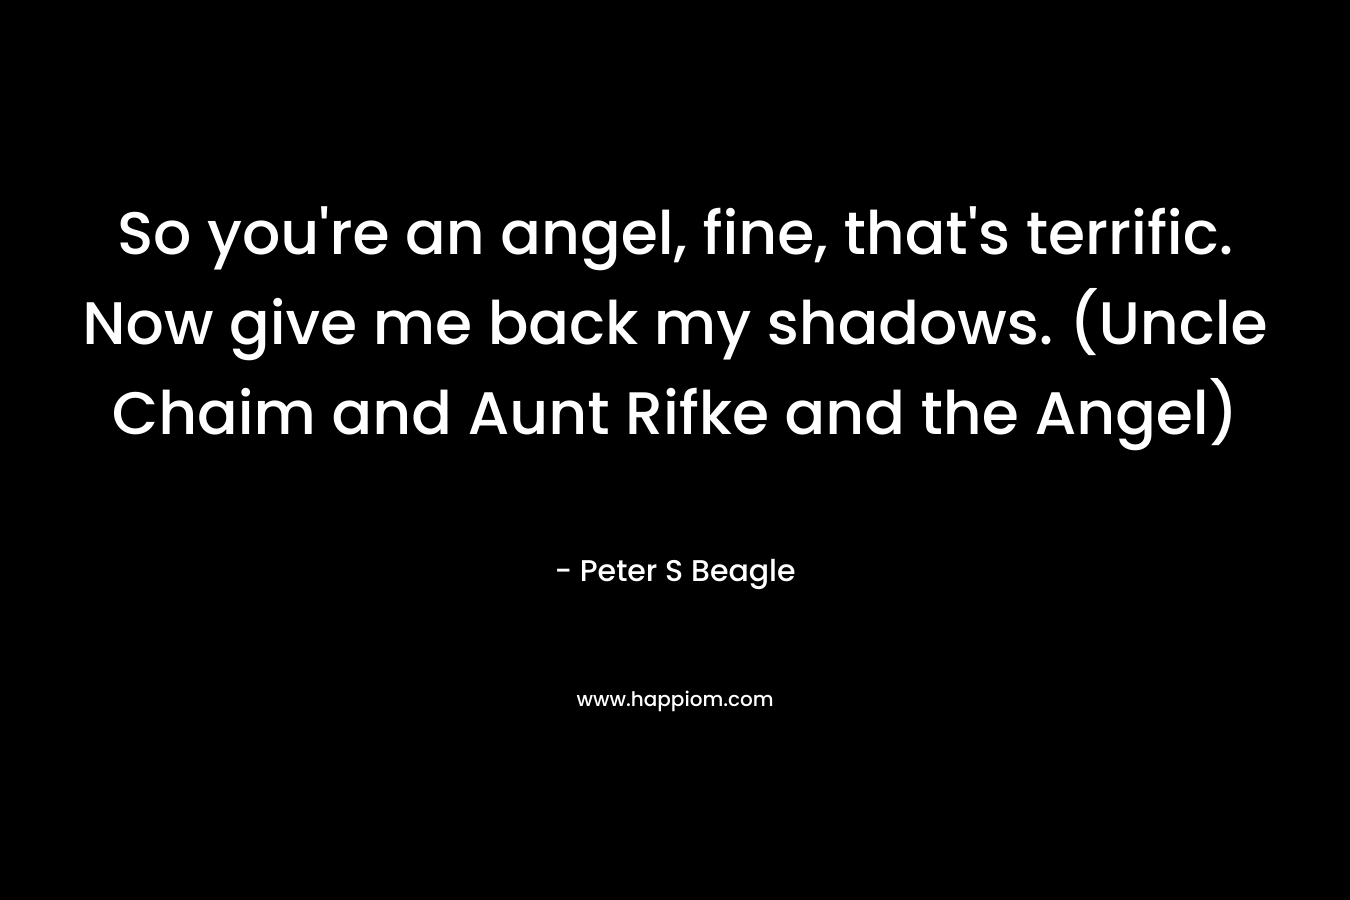 So you’re an angel, fine, that’s terrific. Now give me back my shadows. (Uncle Chaim and Aunt Rifke and the Angel) – Peter S Beagle